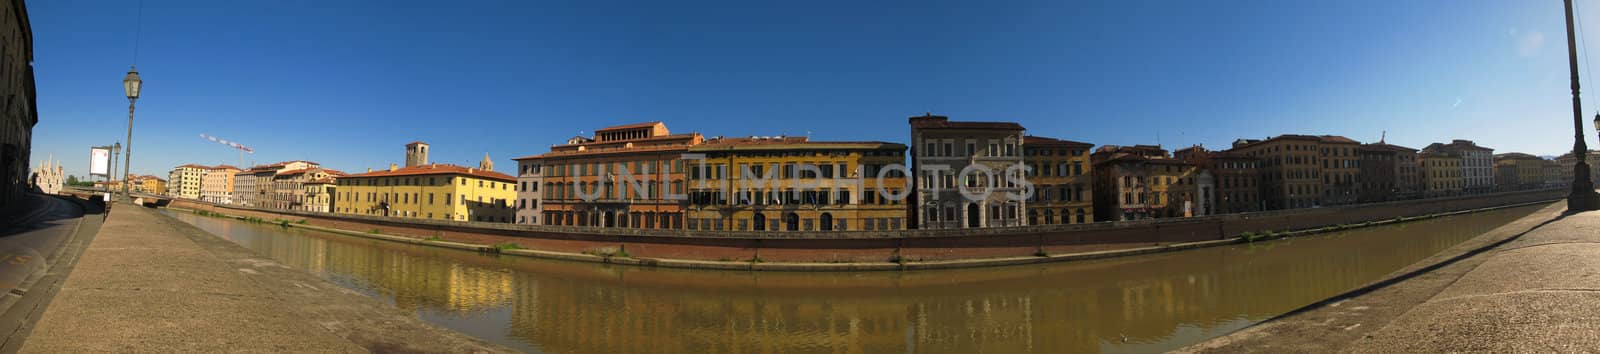 Pisa panoramic view across river Arno by Arrxxx